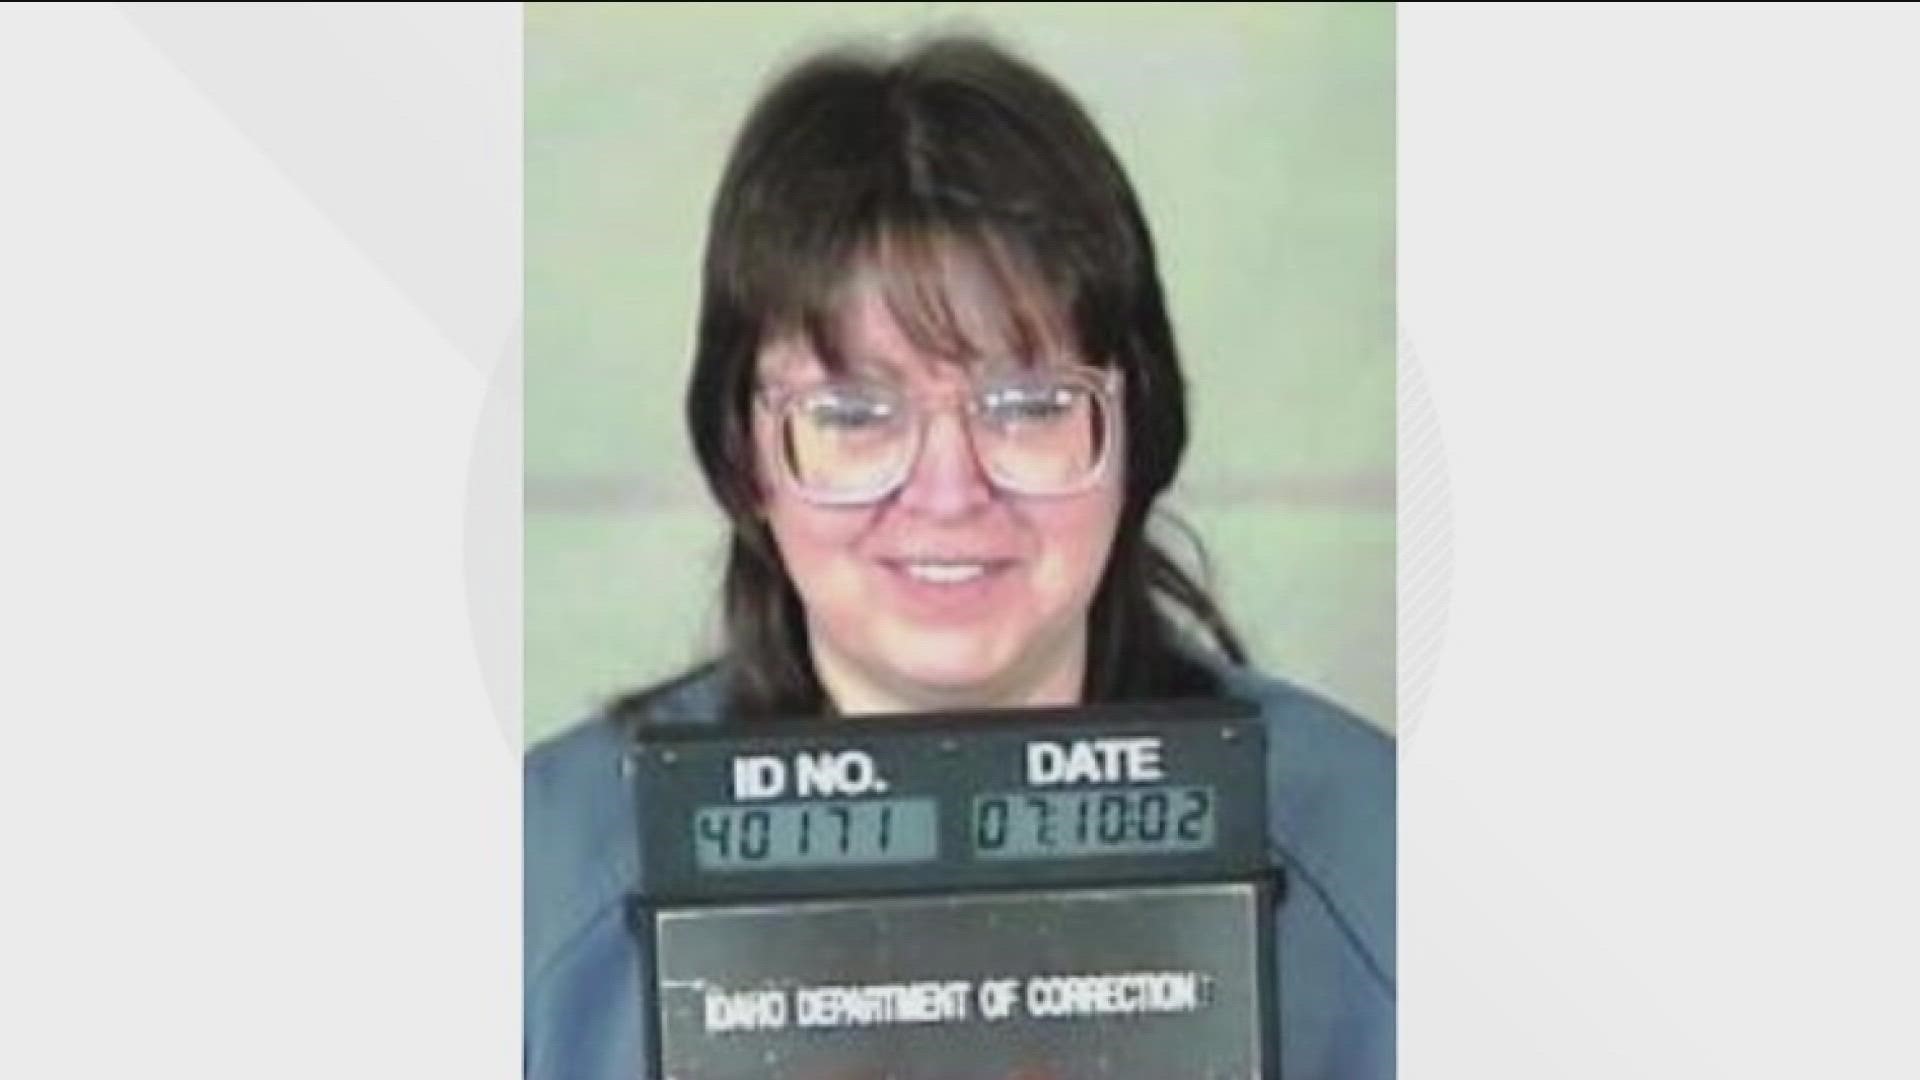 Row and her defense have filed once again to vacate her death sentence in light of a new U.S Supreme Court decision.